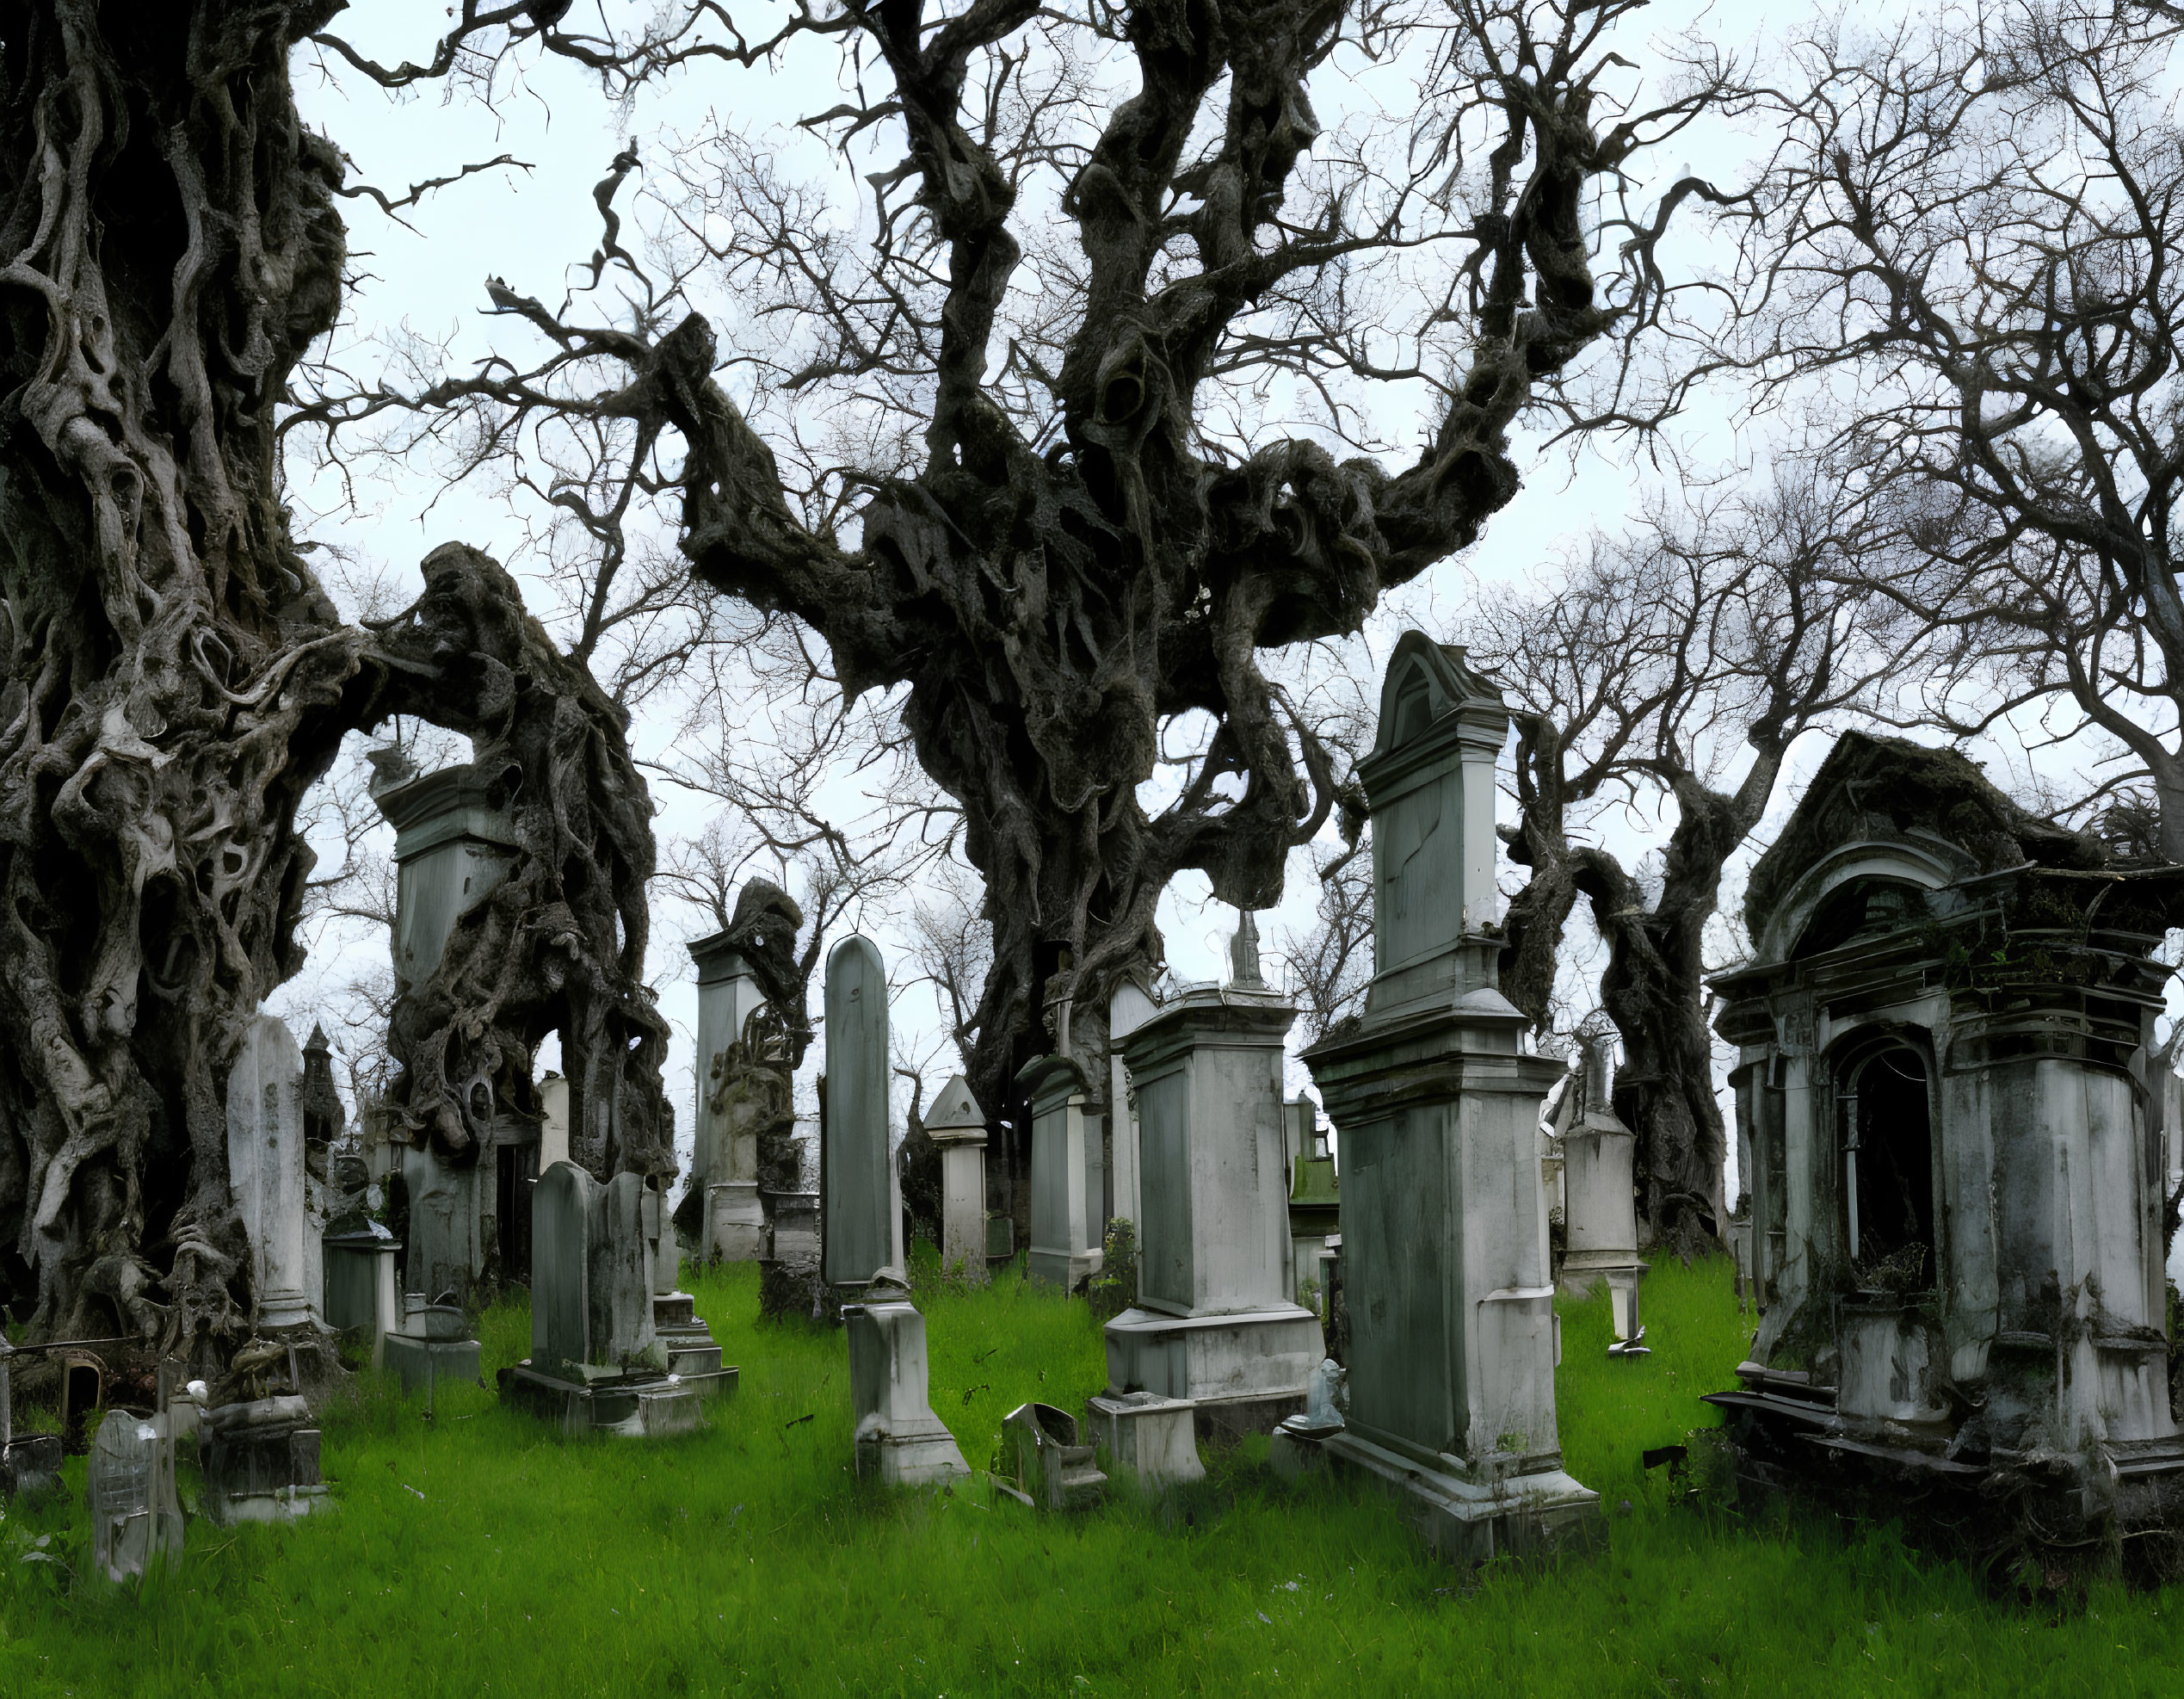 Ornate tombstones in old cemetery with mausoleums and leafless trees